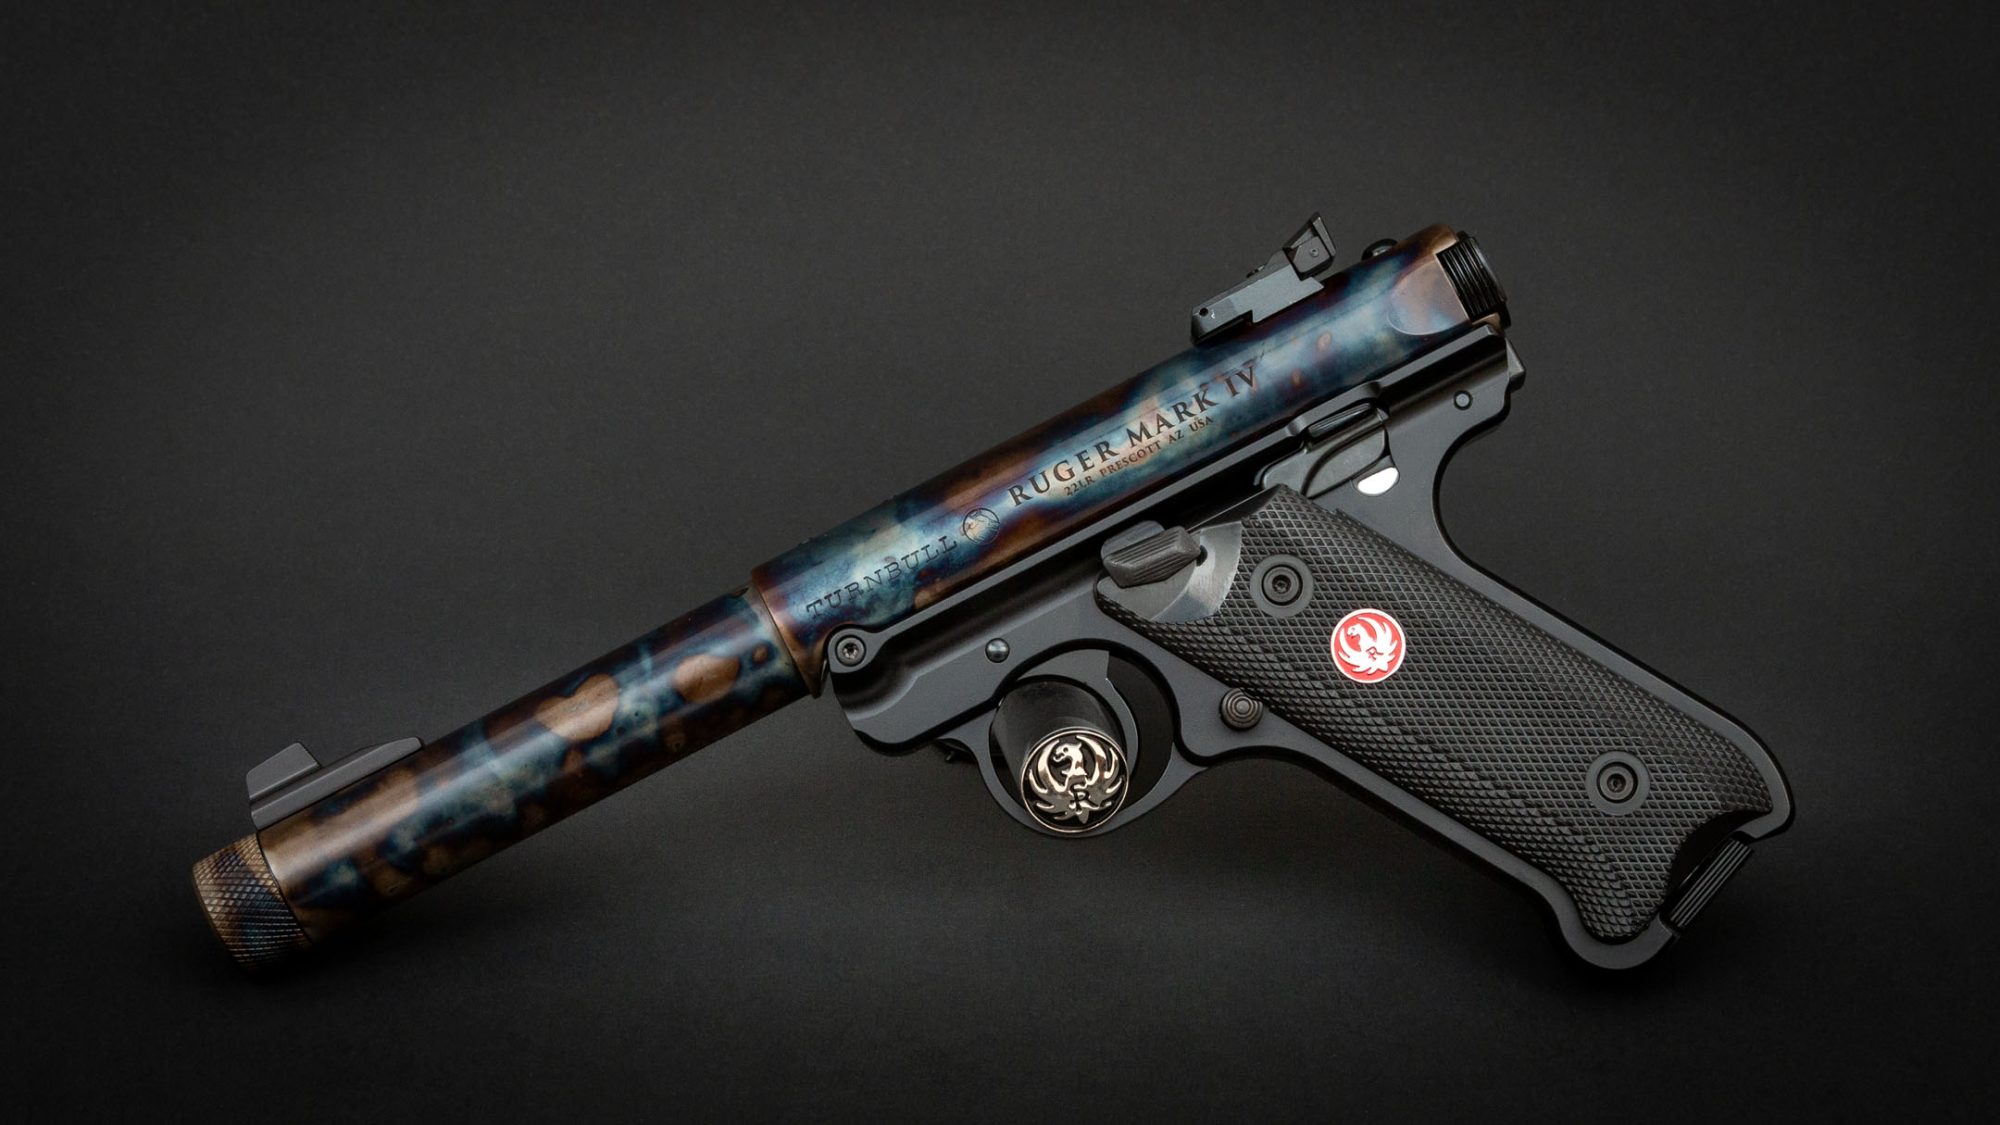 Ruger Mark IV Target Model with Threaded Barrel, featuring bone charcoal color case hardened barrel by Turnbull Restoration Co. of Bloomfield, NY